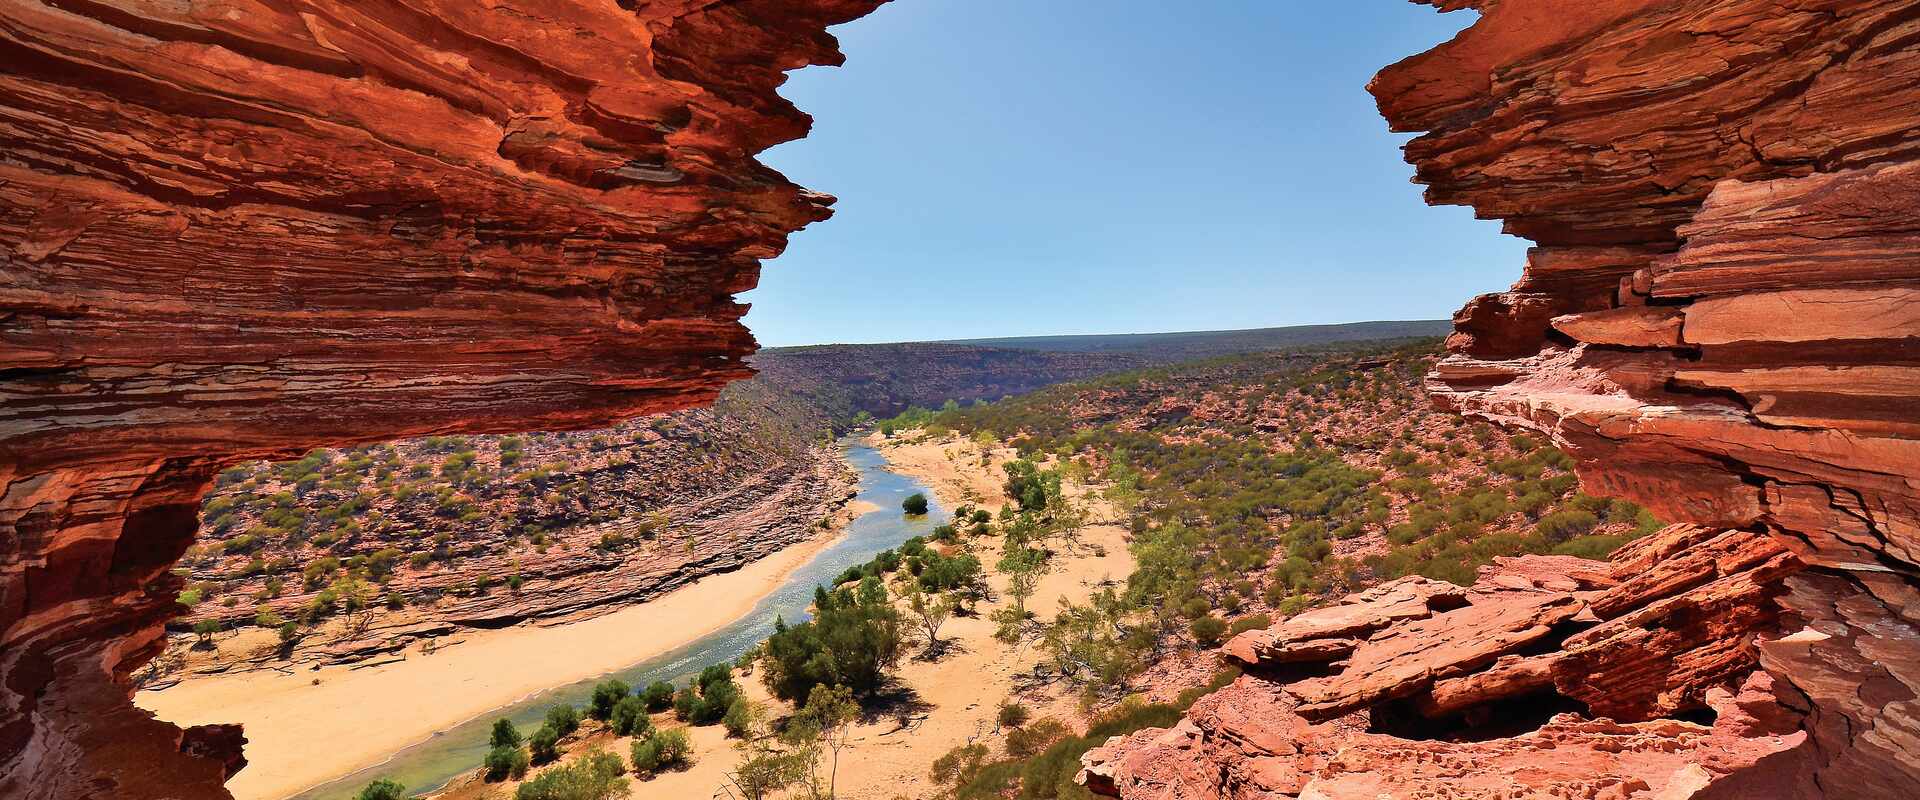 Distant view of river and surrounds seen between to red rock faces, Australia